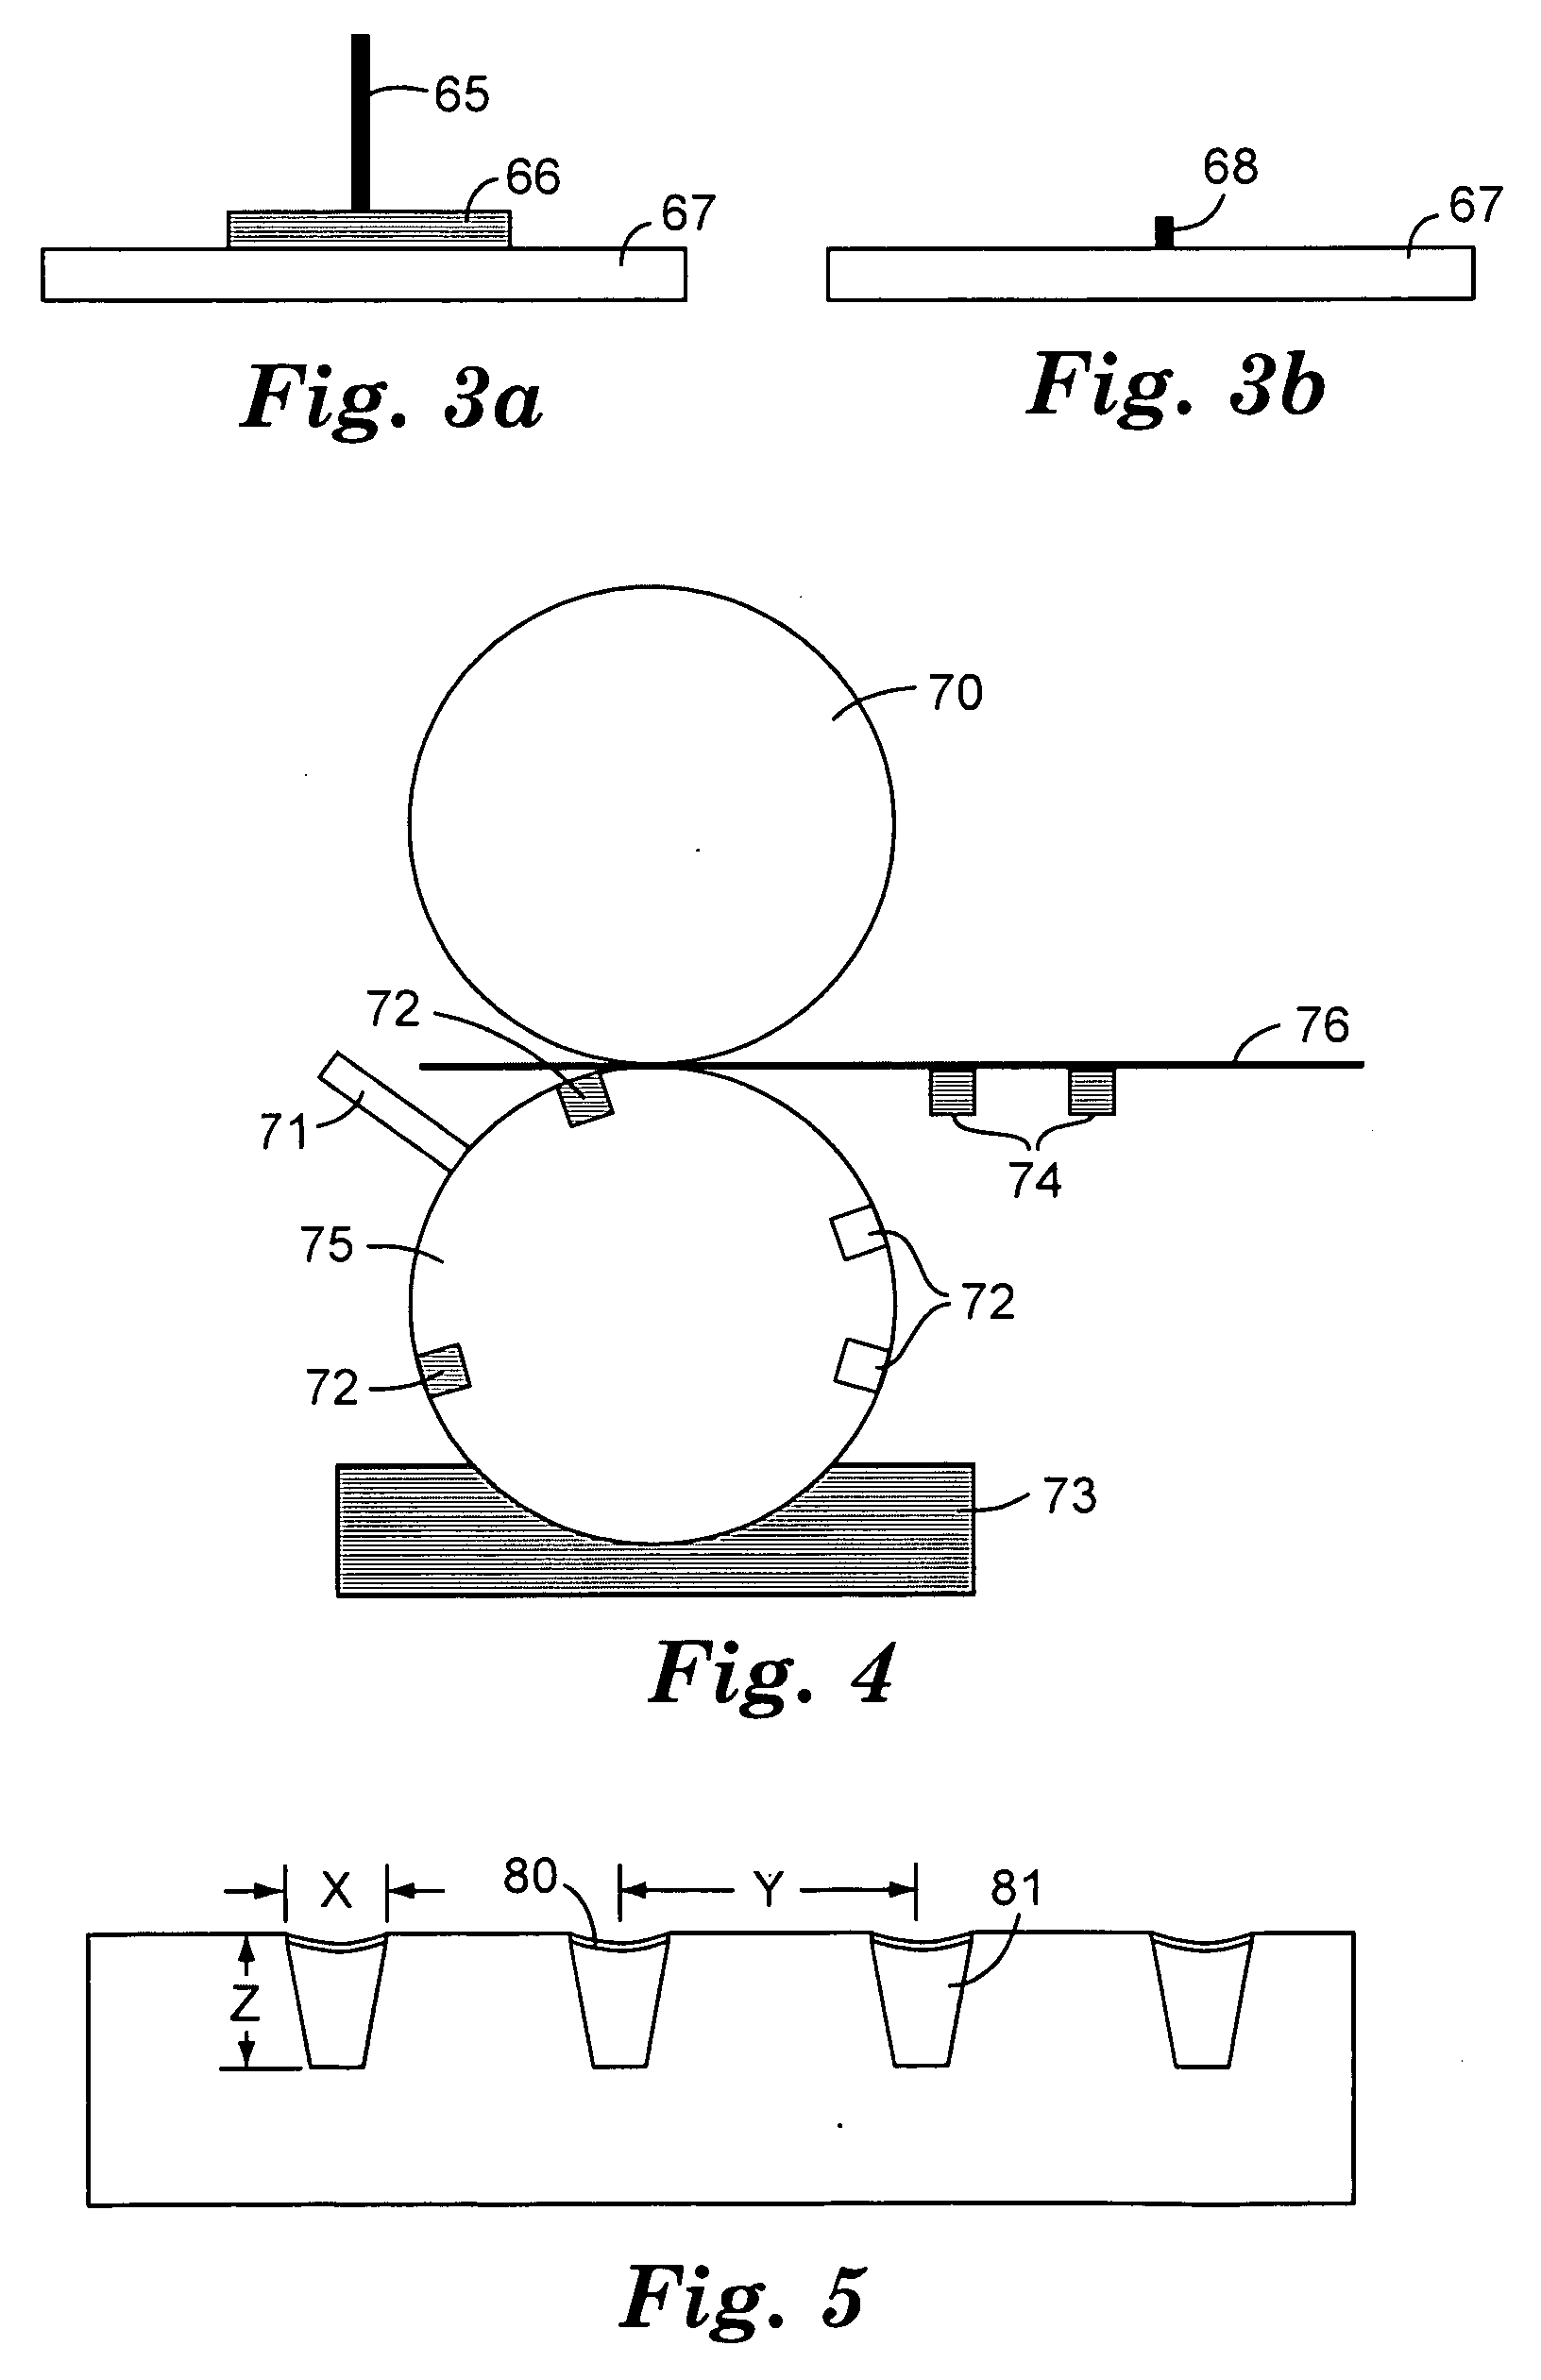 Touch screen sensor with low visibility conductors